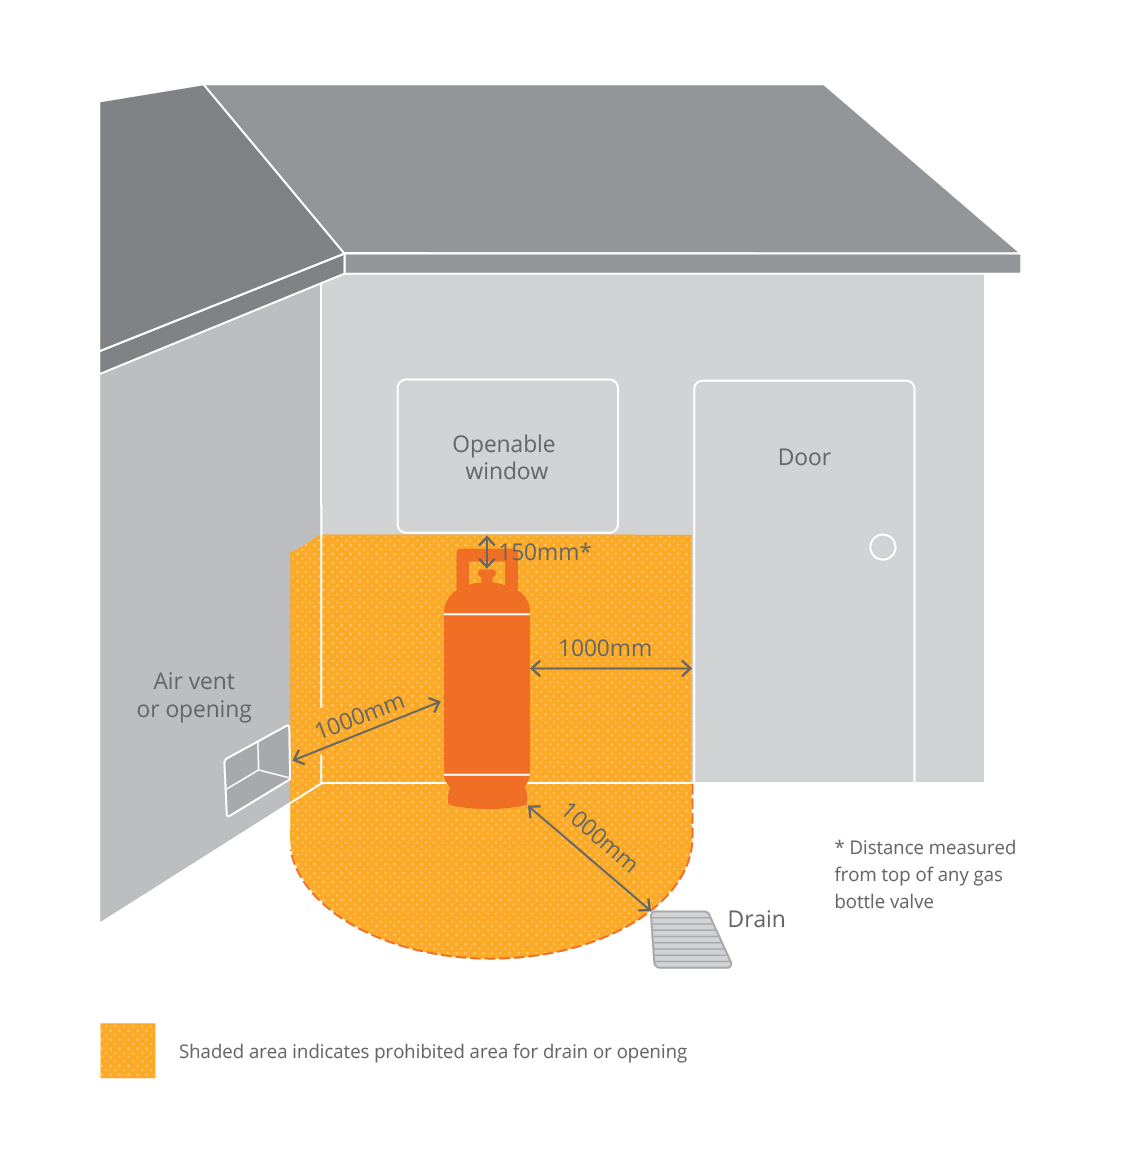 minimum-clearance-to-openings-gas-exchange-illustration